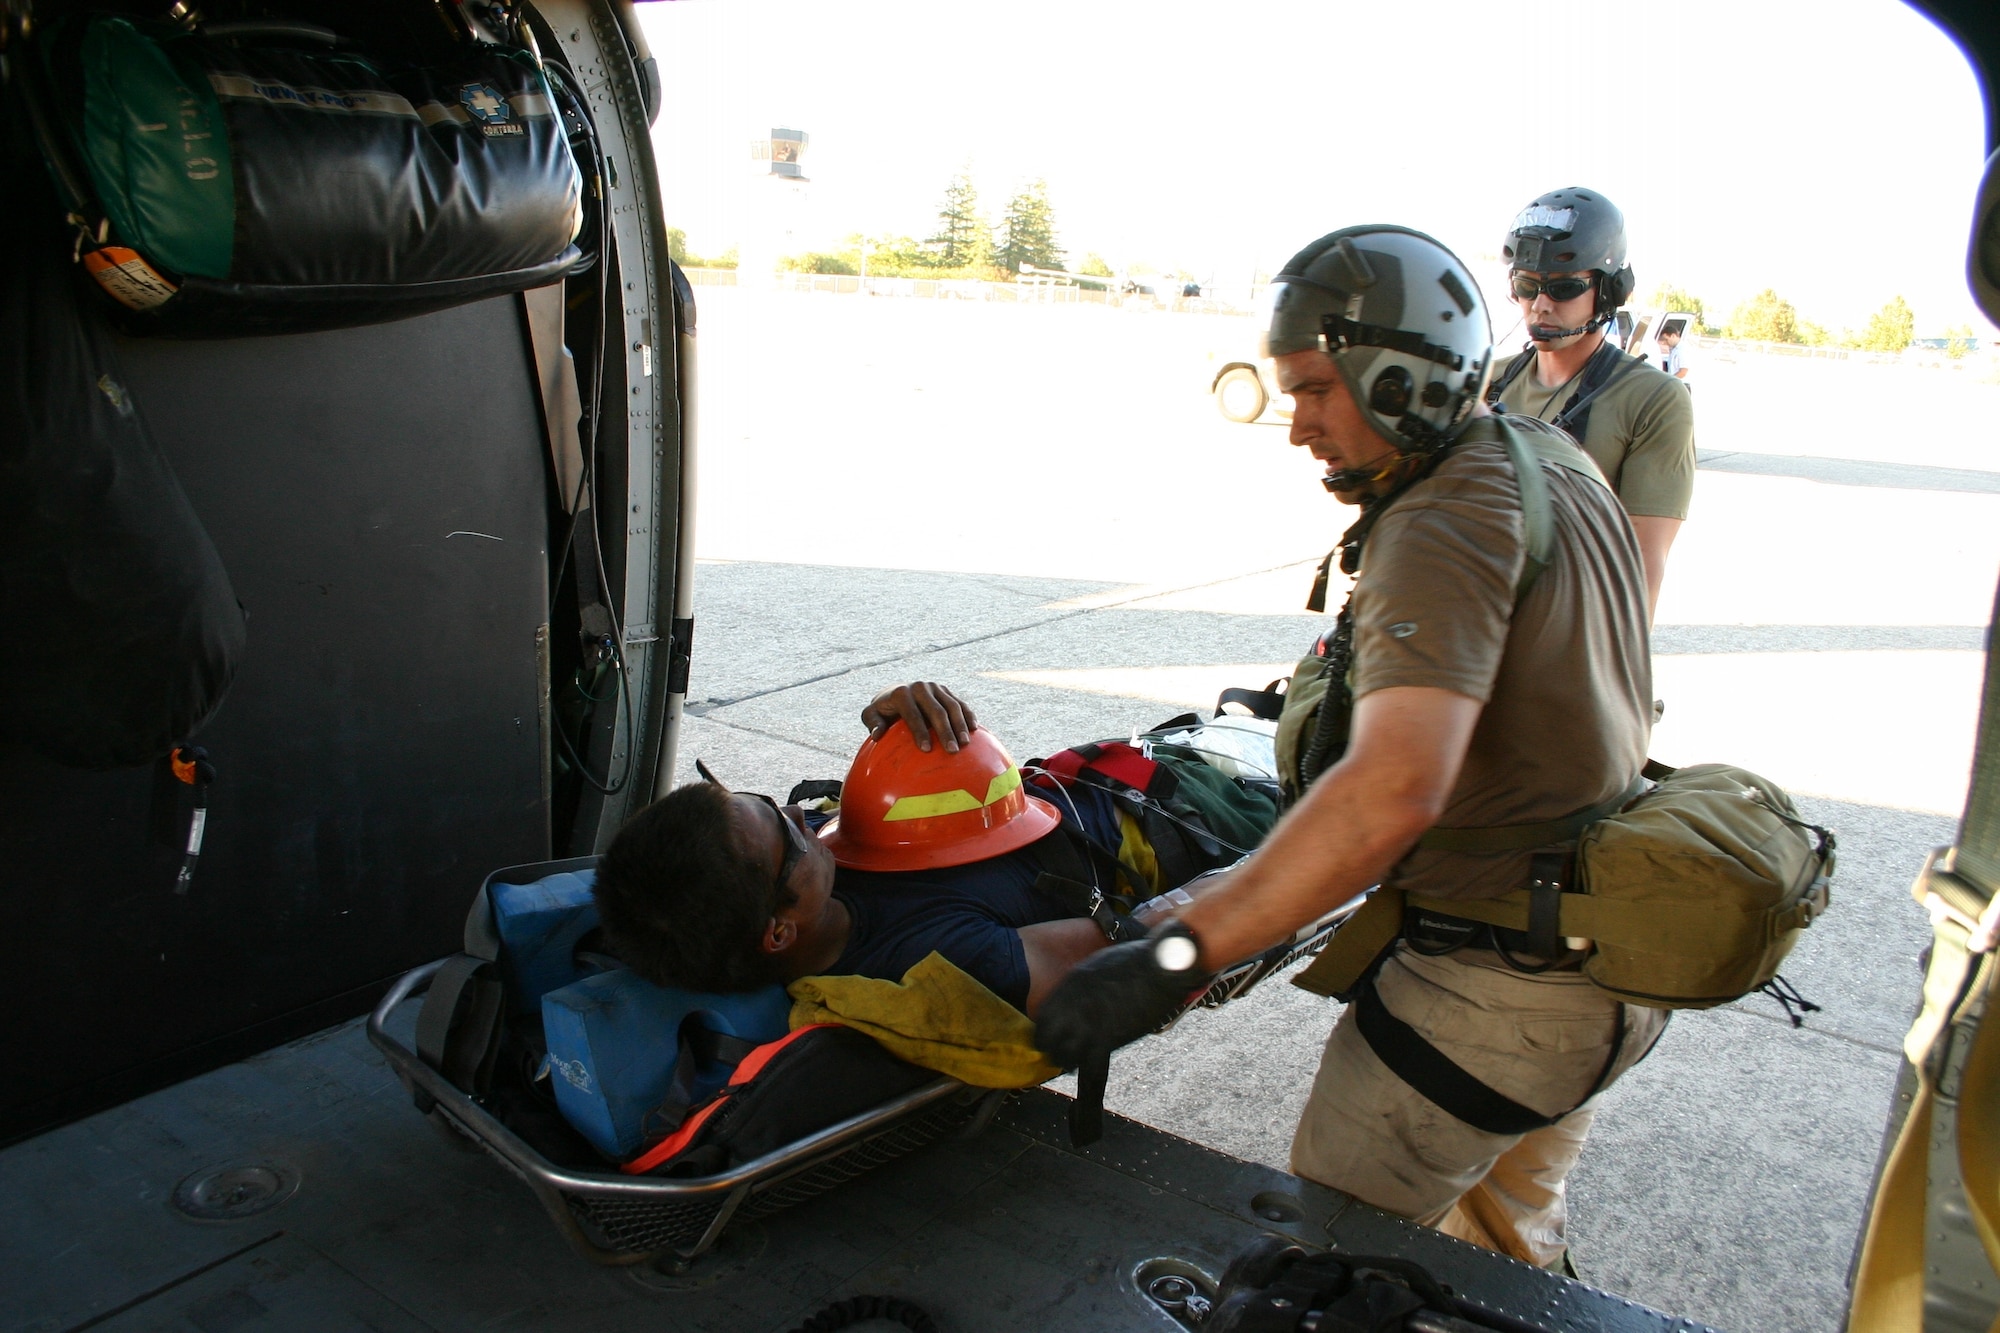 Tech. Sgt. Michael Bendle (left) and Staff Sgt. Seth Zweben (right), pararescuemen from the 131st Rescue Squadron, prepare to transfer a firefighter off of the 129th Rescue Wing-based HH-60G Pave Hawk to an awaiting ambulance at the Chico Municiple Airport, Calif., Aug. 4. The firefighter was working in the Feather River Complex near French Bear, Calif., when he suffered a heat stroke. The 129th Rescue Wing aircrew and pararescuemen hovered over steep terrain and hoisted the firefighter up in to the Pave Hawk. The total number of people saved by the 129th RQW is 561. (U.S. Air Force photo by Tech. Sgt. Brock Woodward) 